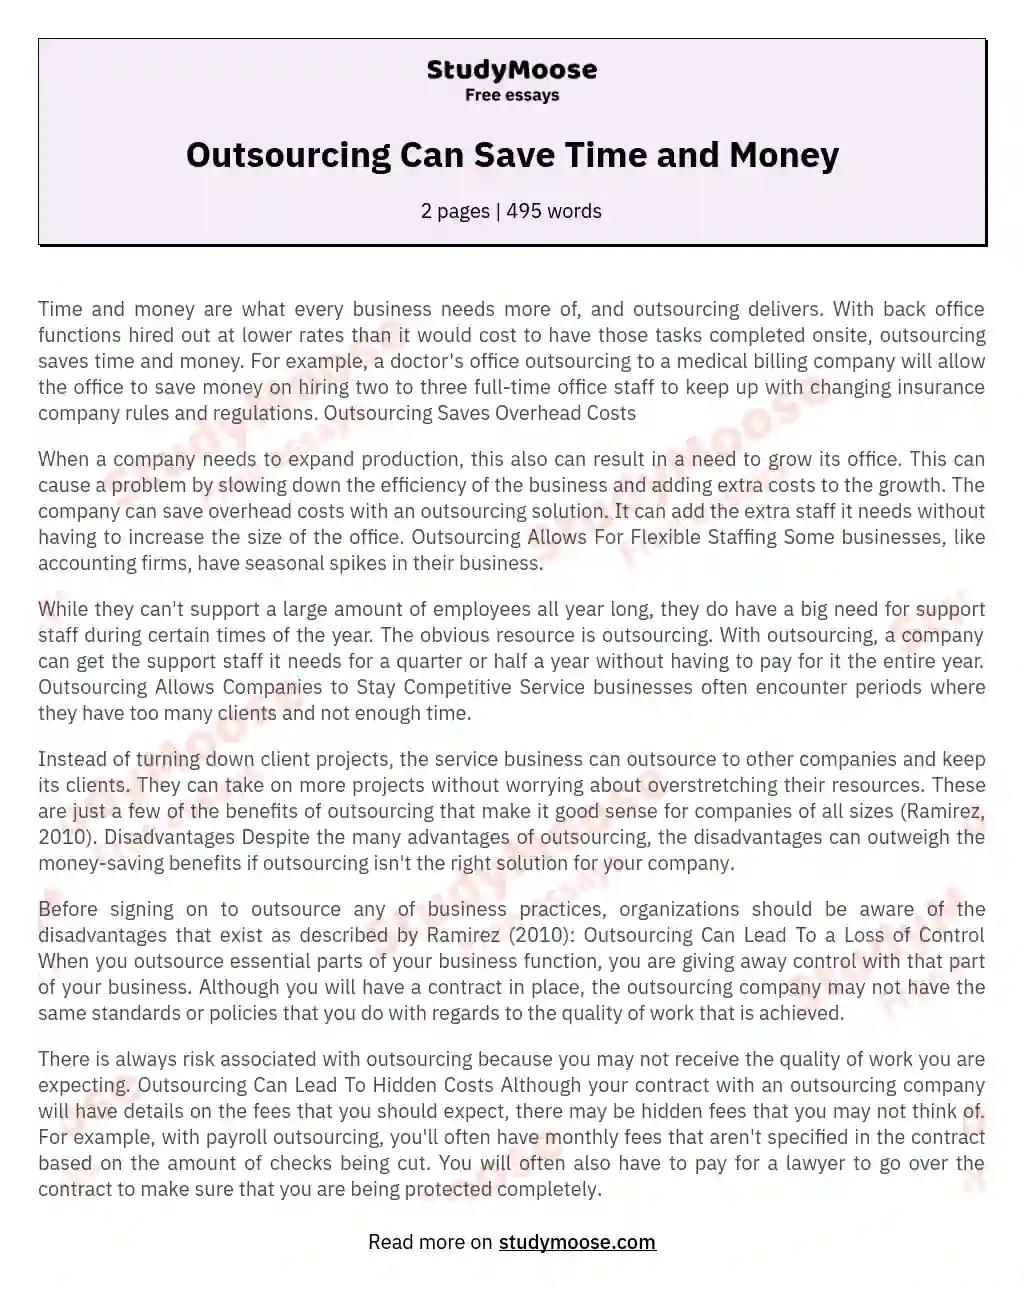 Outsourcing Can Save Time and Money essay